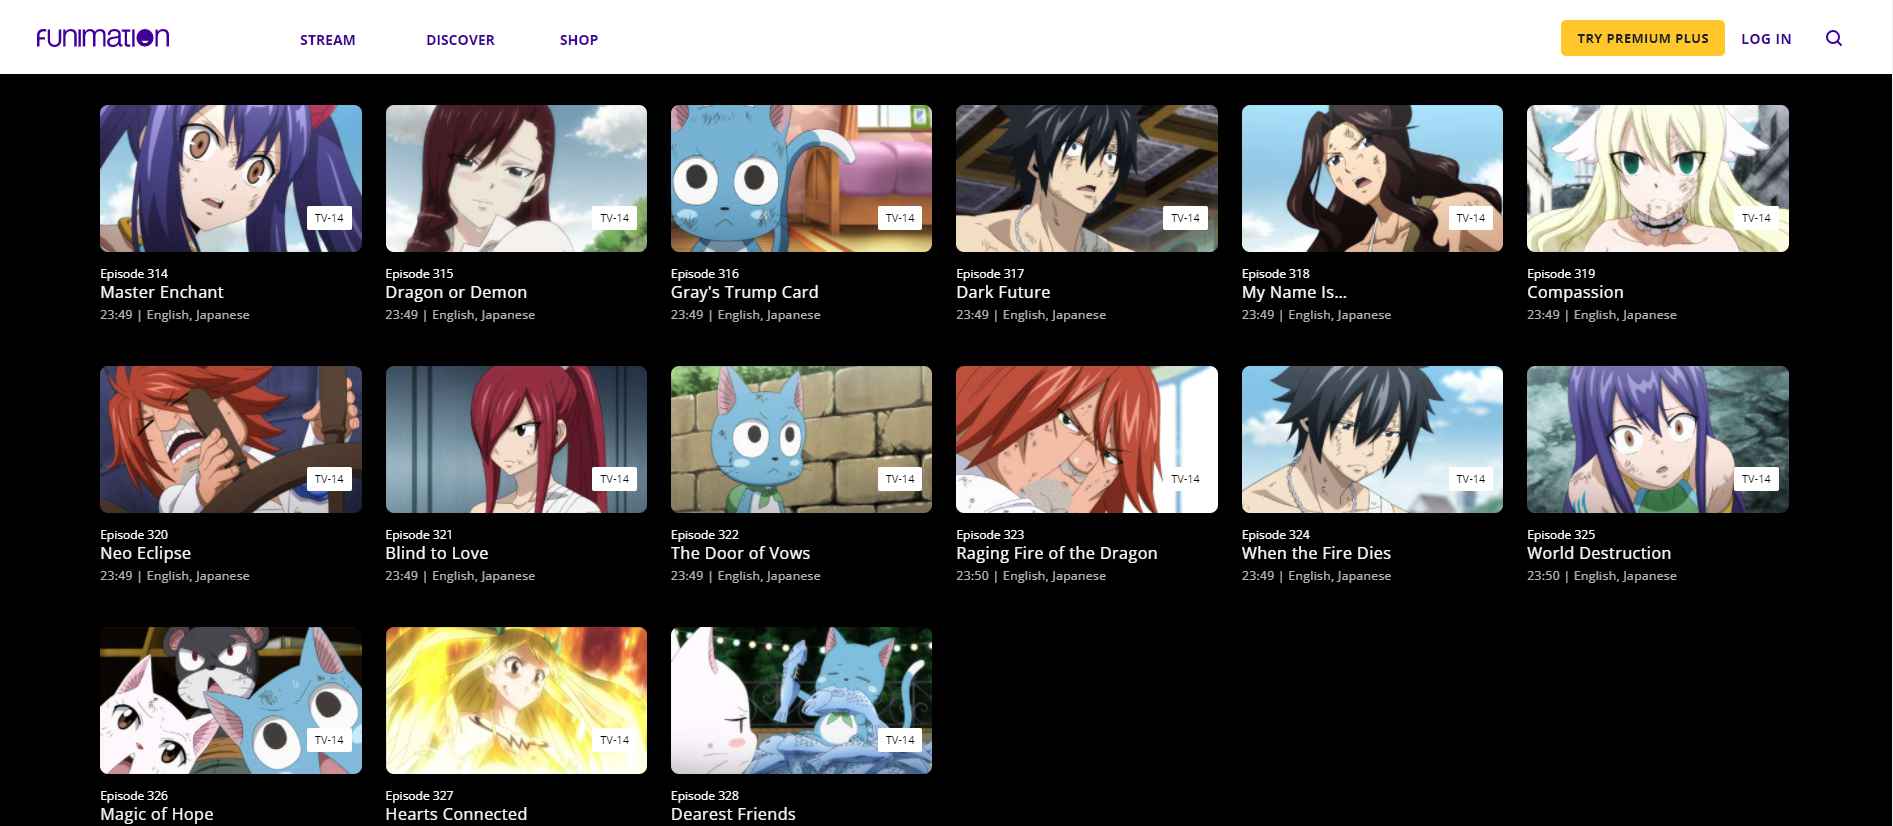 Fairy Tail on Funimation